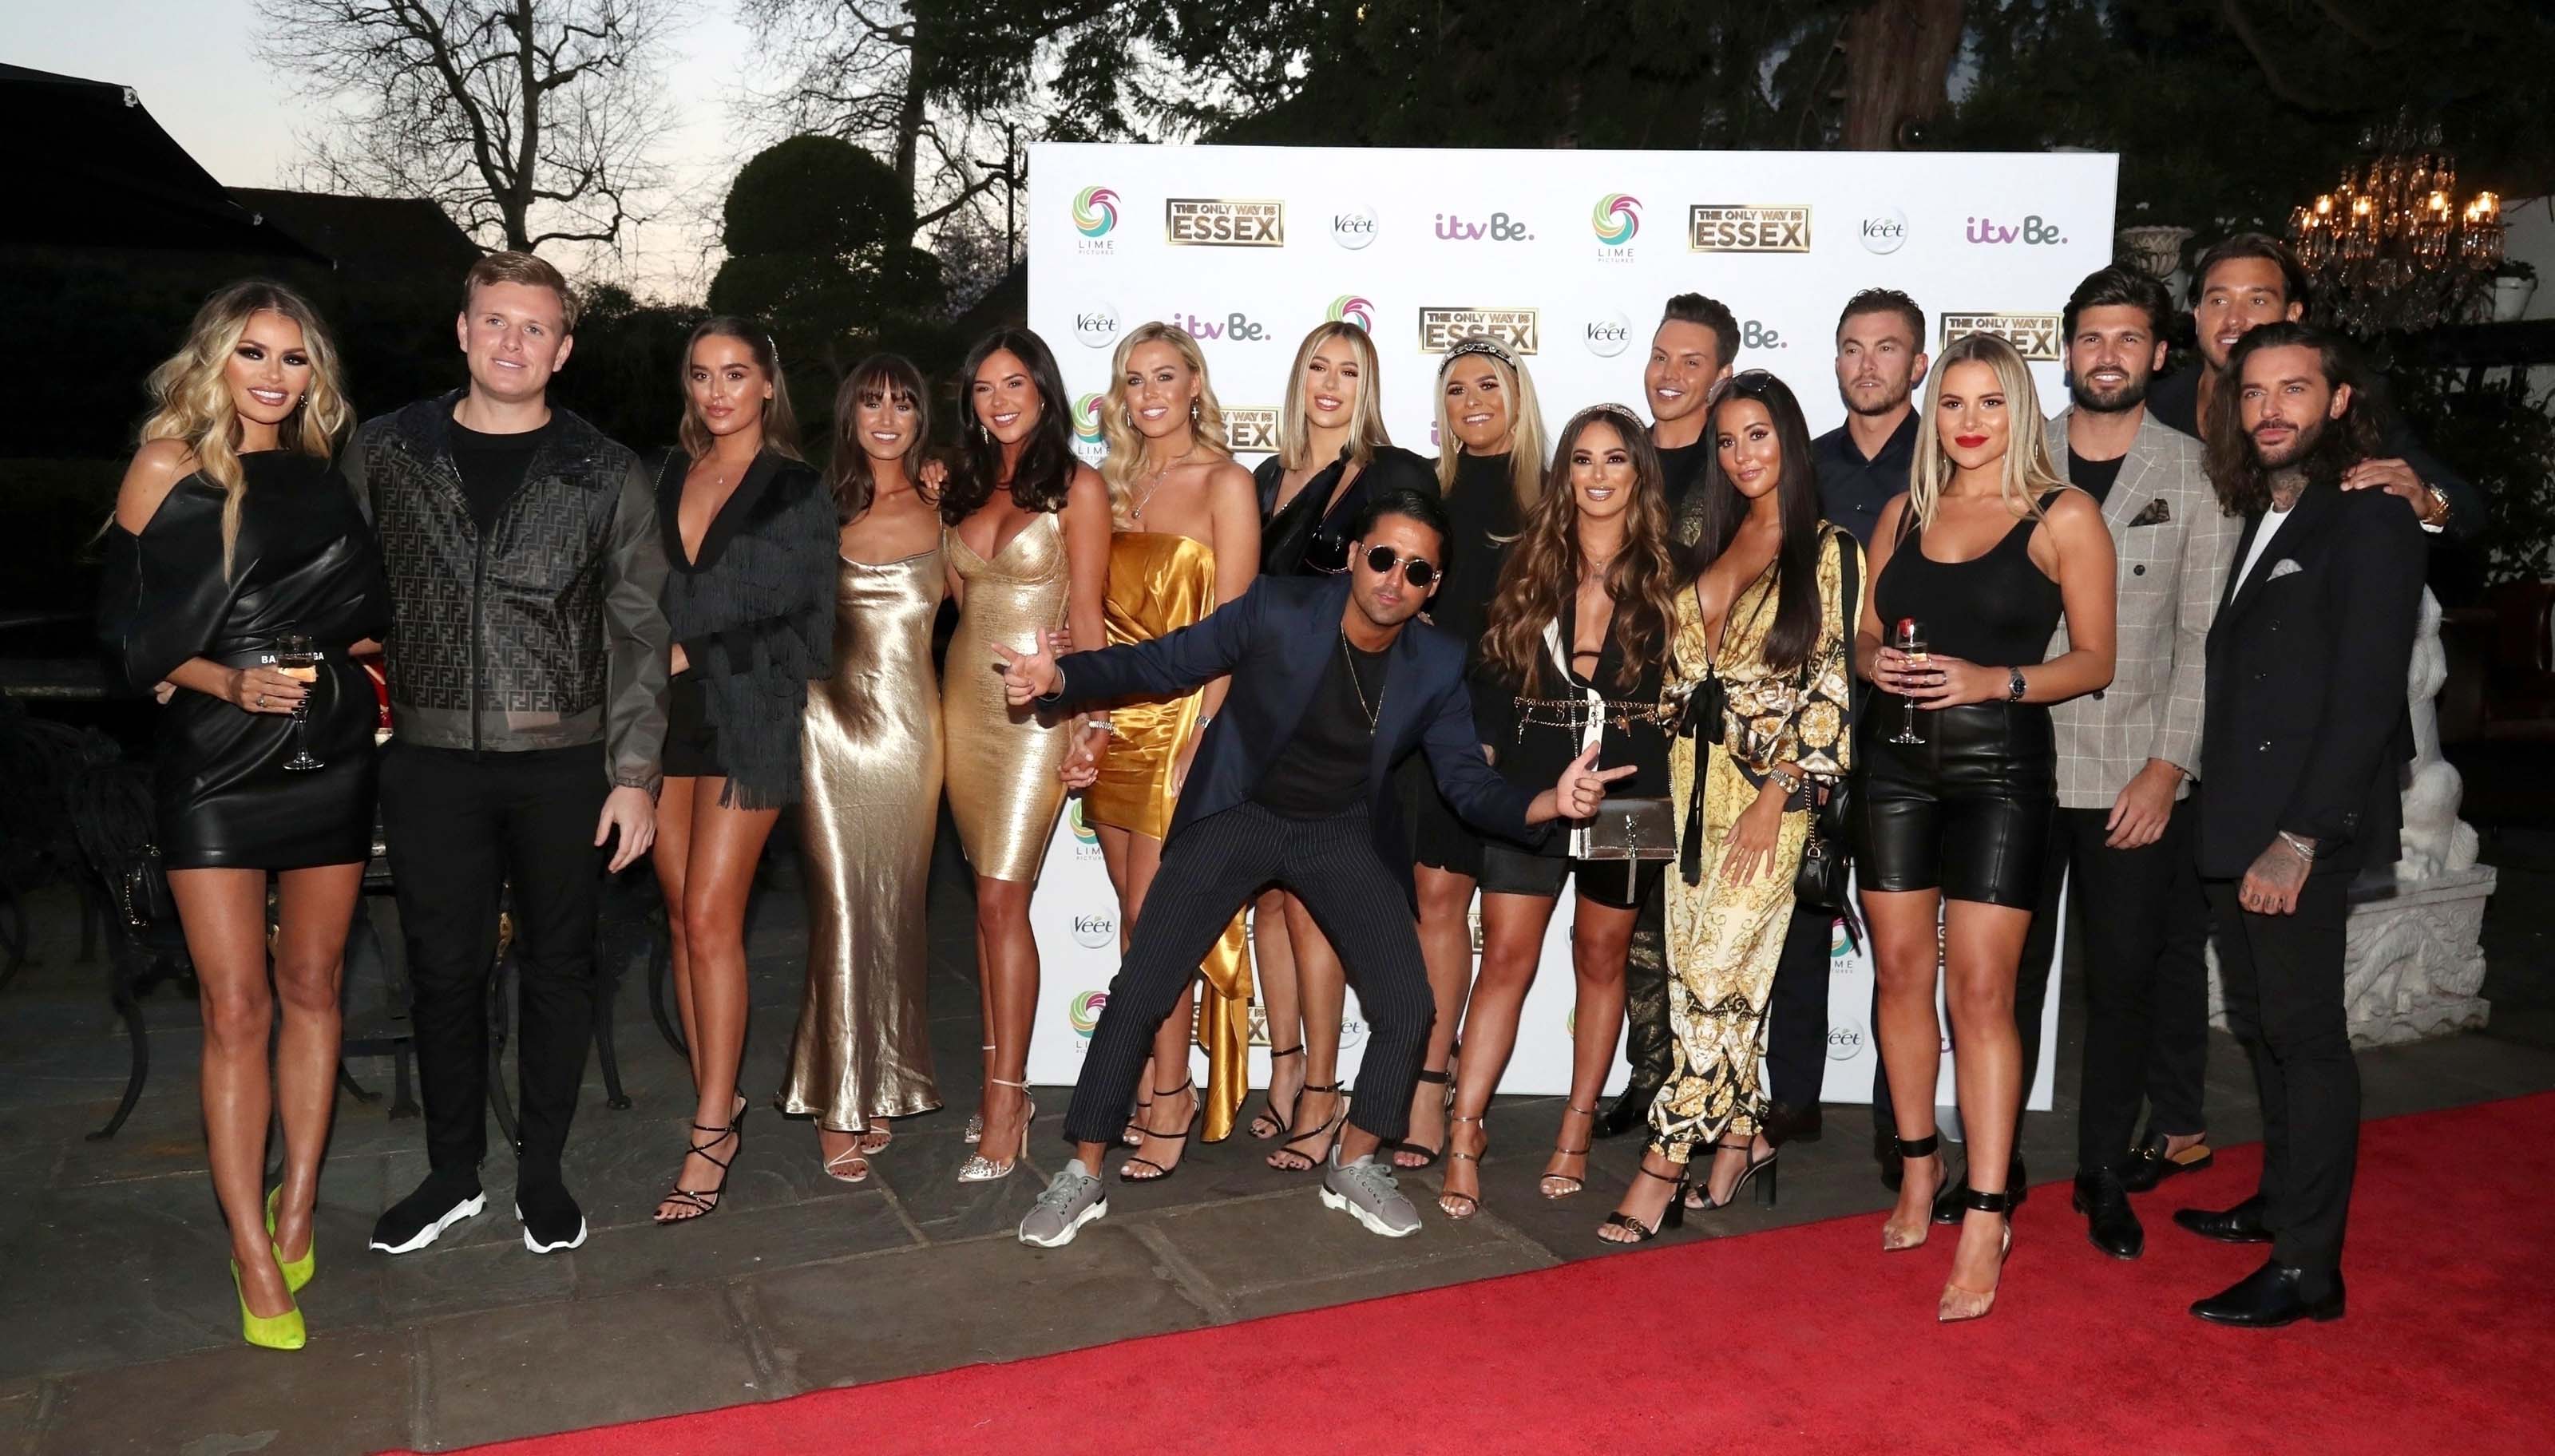 Demi Sims, Chloe Sims & Georgia Kousoulou attend The Only Way Is Essex’ TV show press night